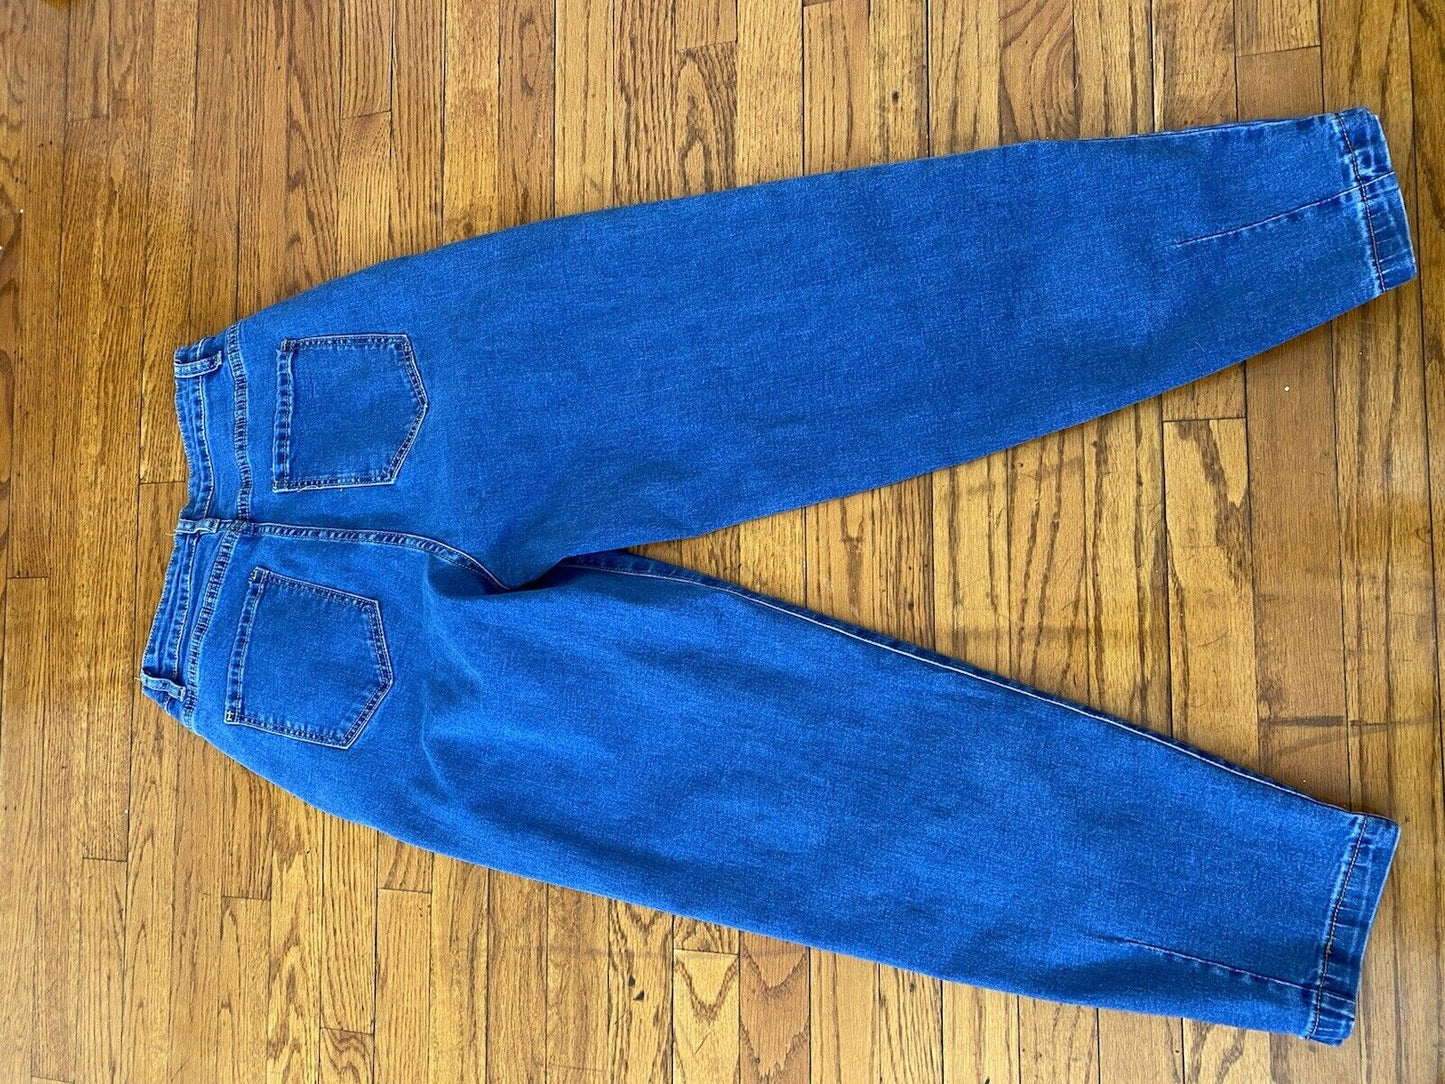 Vintage High Waist Tapered Denim Jeans - Unbranded - Women's Small